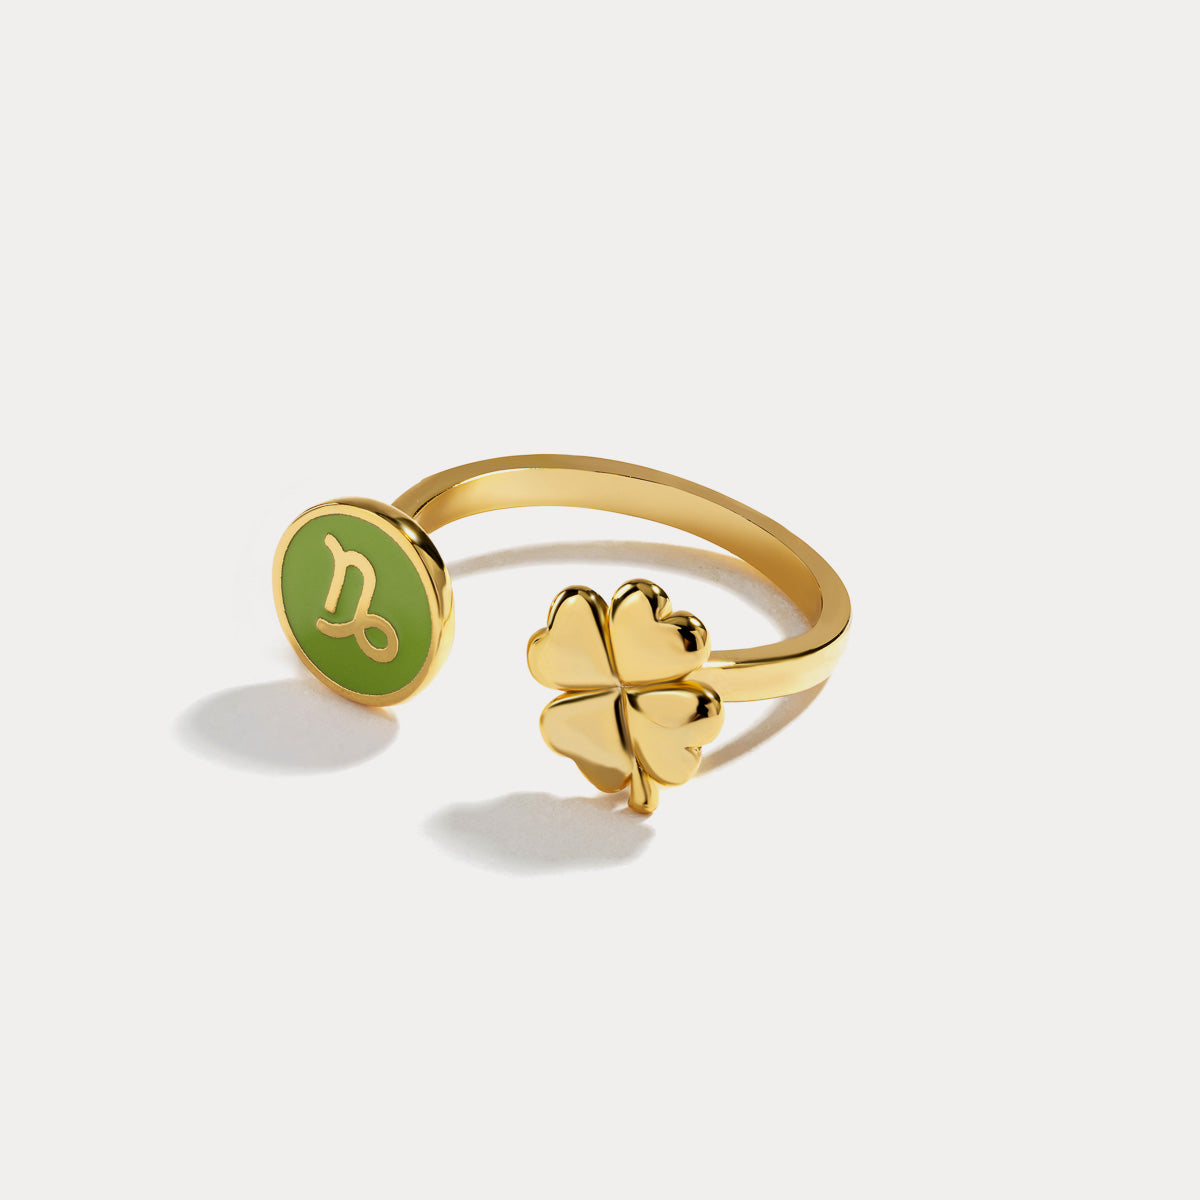 Capricorn astrological sign ring